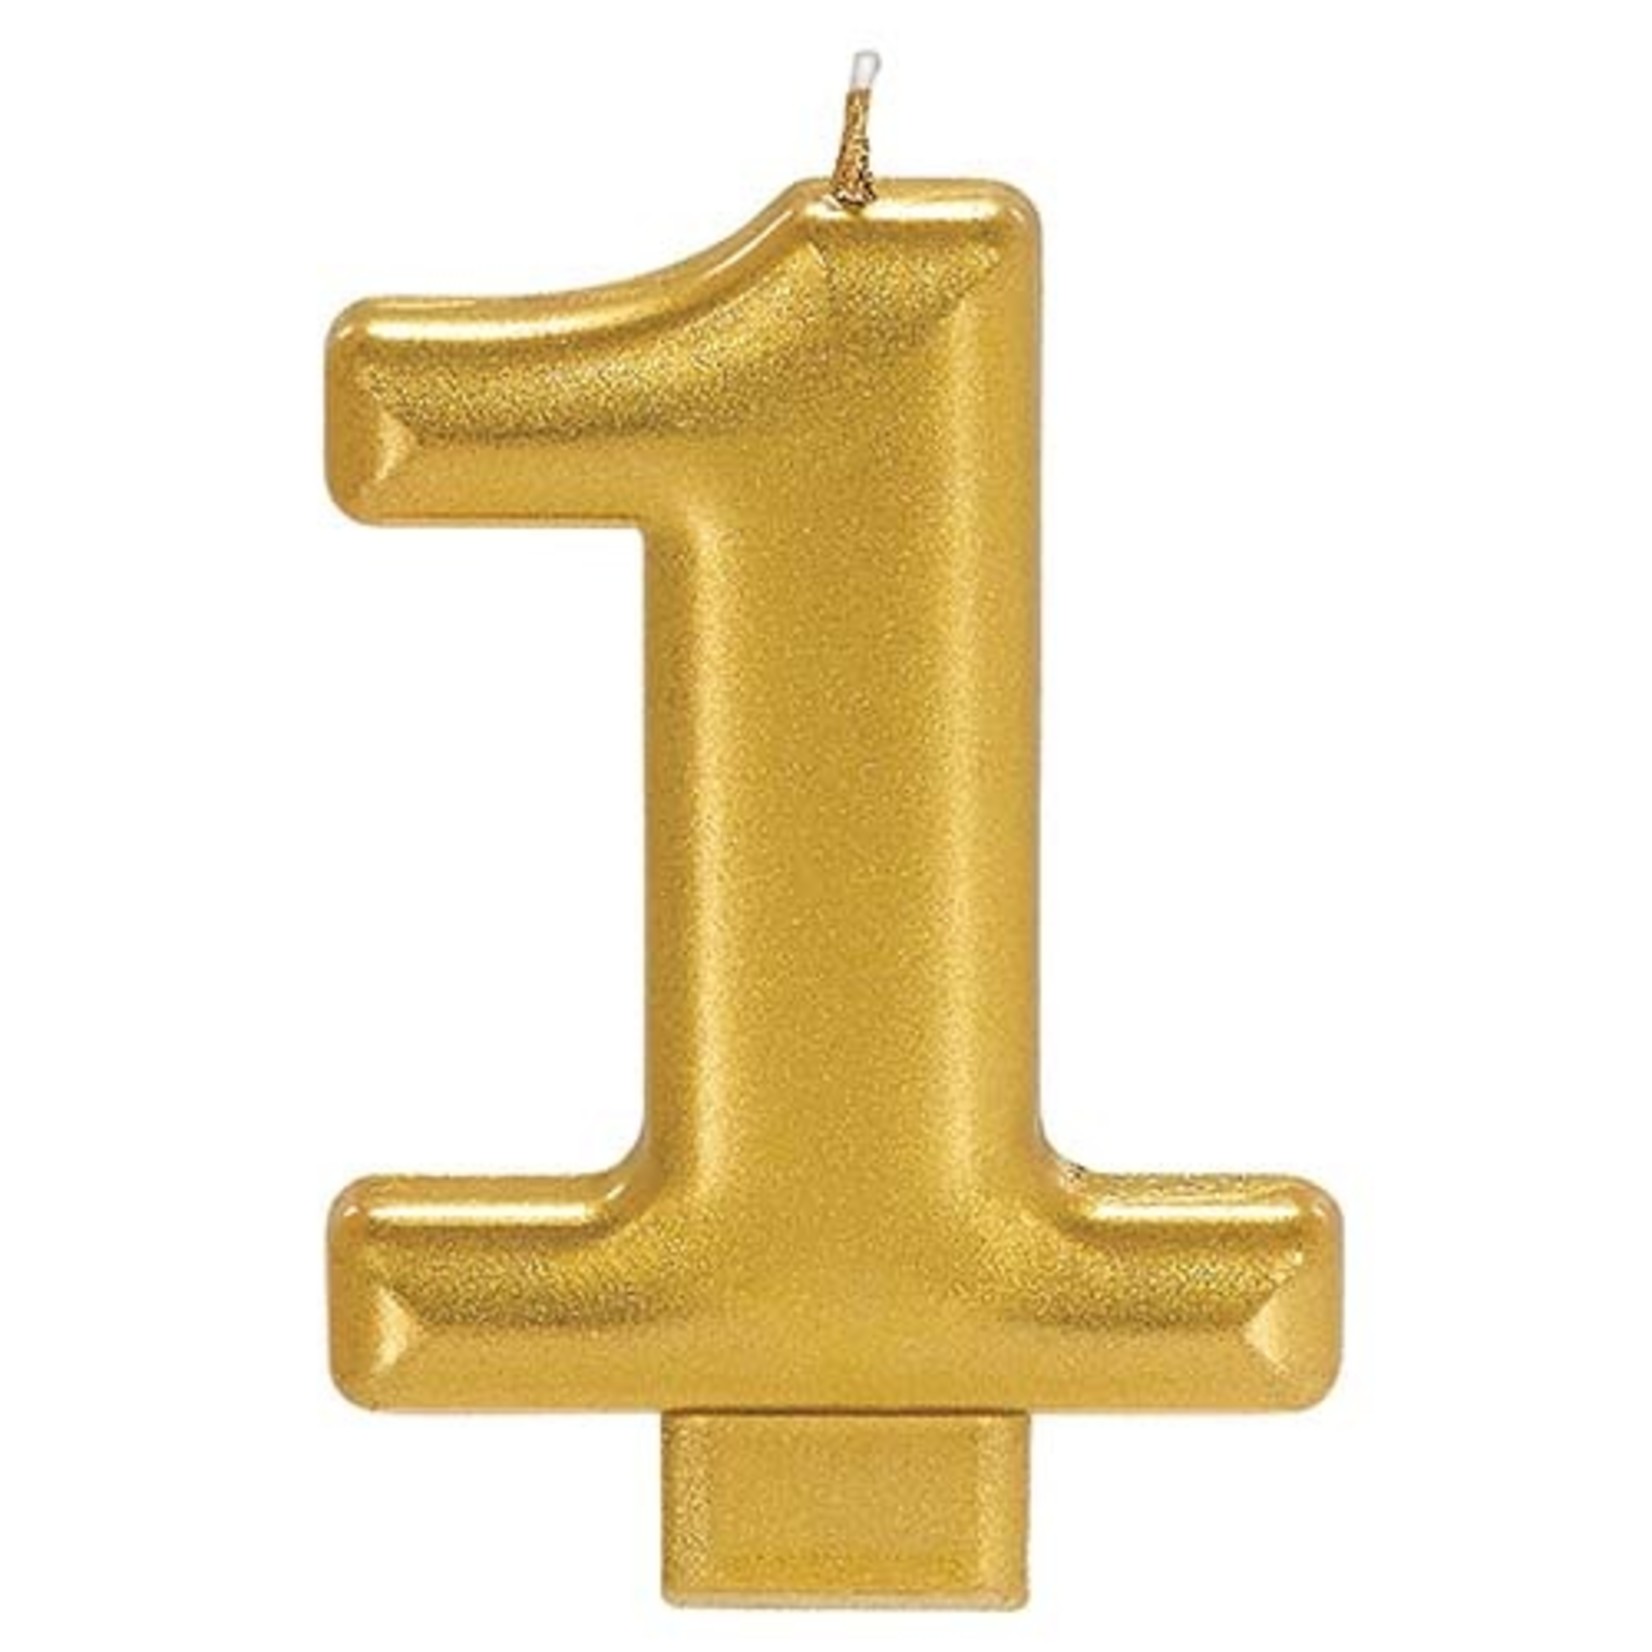 Amscan #1 Metallic Gold Number Candle - 1ct.